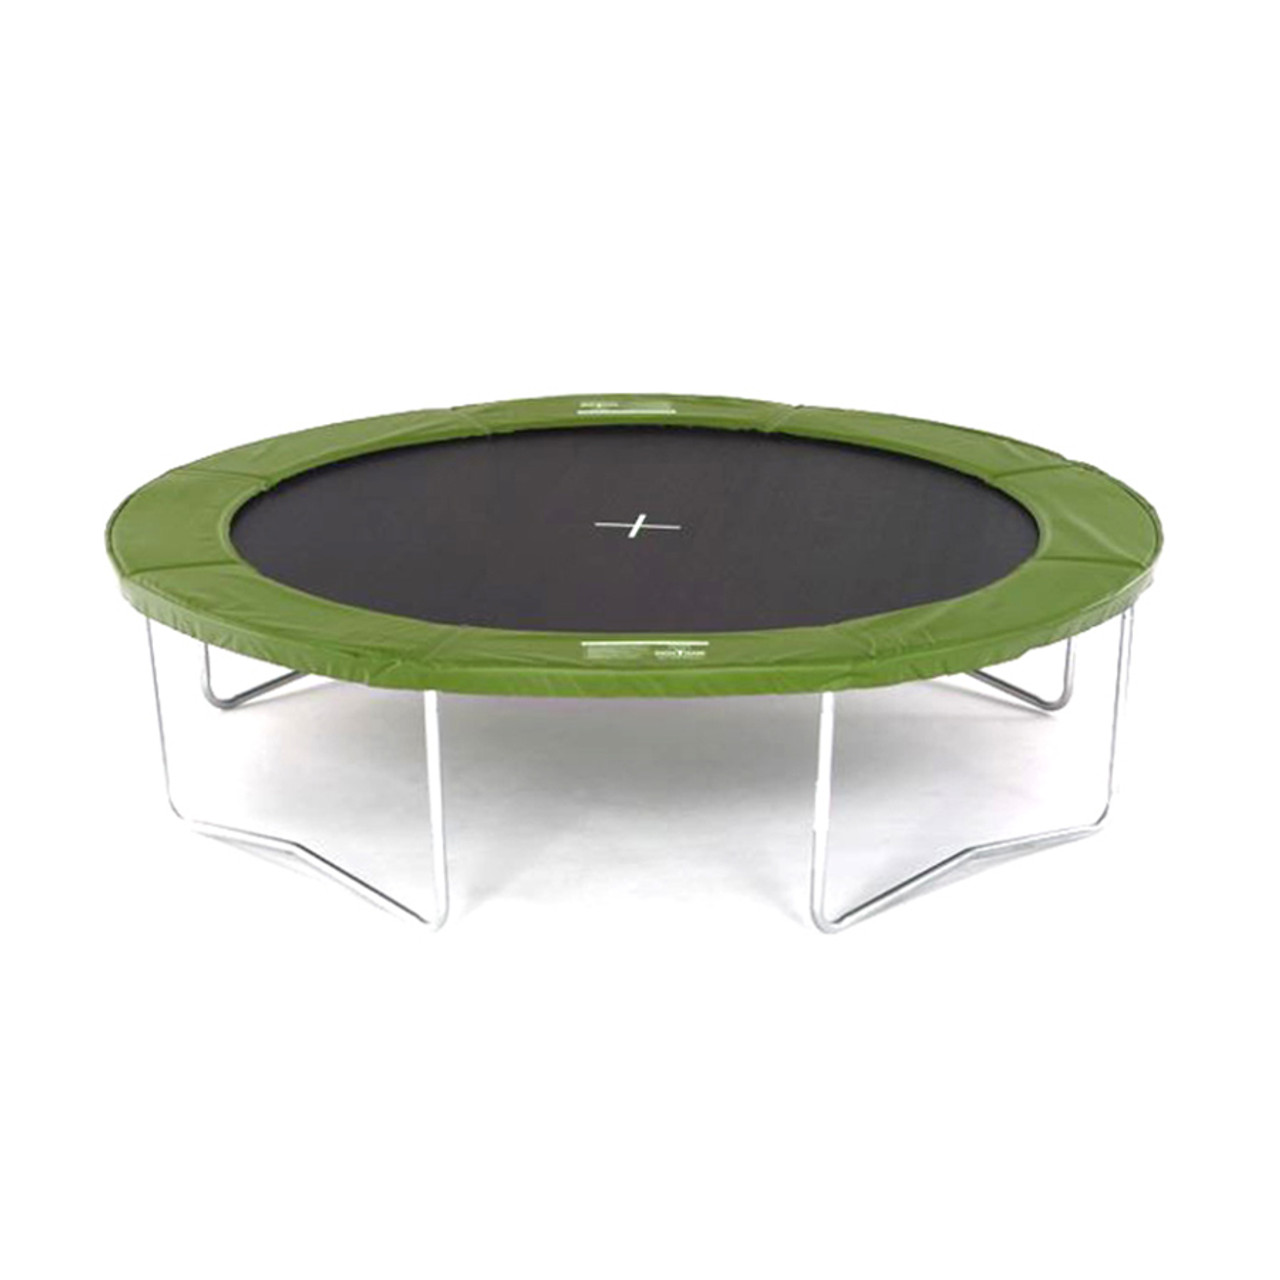 The Cosmic Bouncer 10ft Trampoline (frame surface rust)